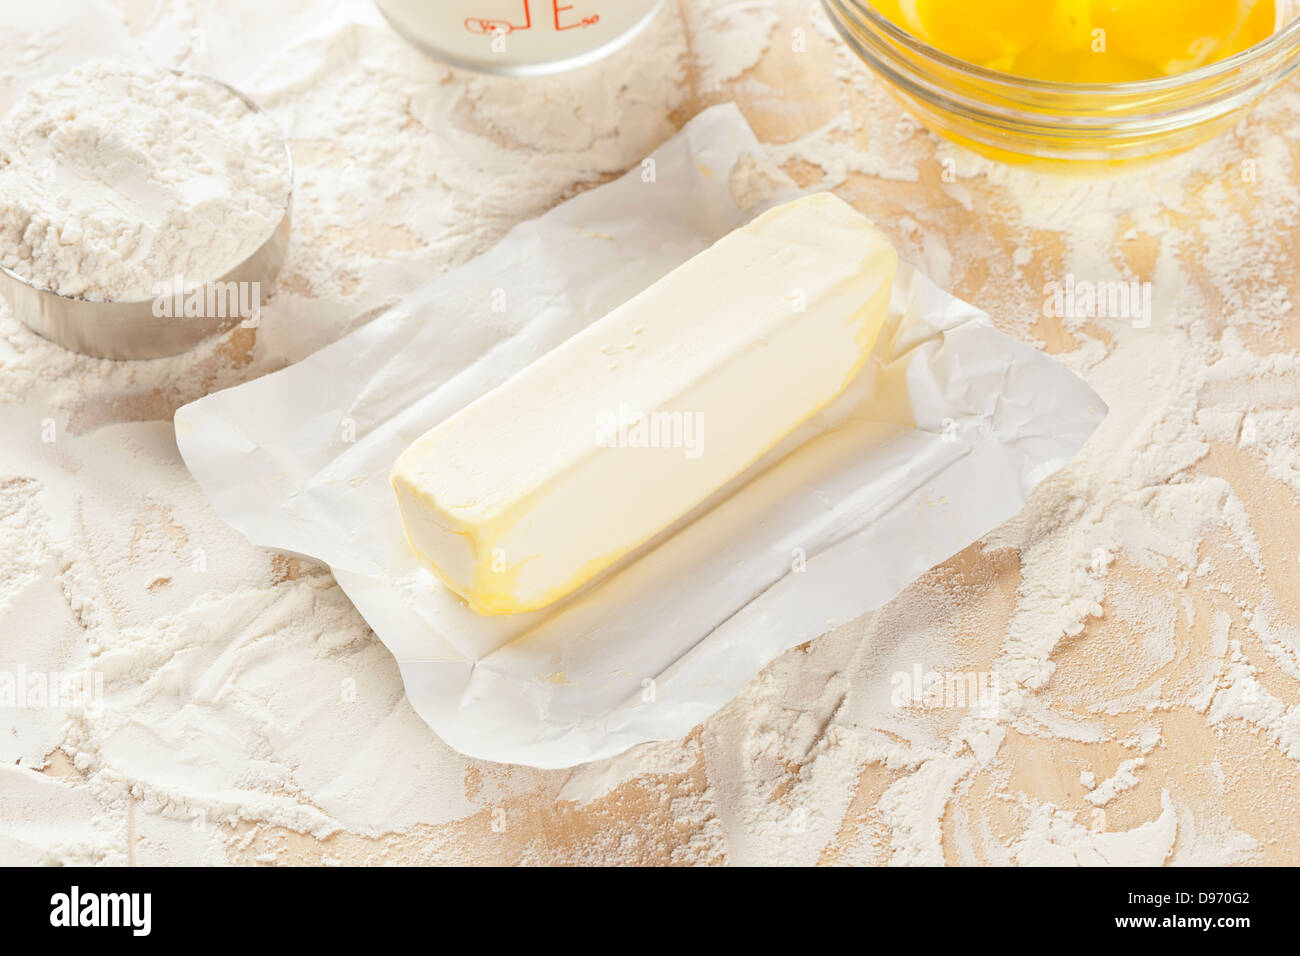 Fresh natural butter in front of baking ingredients Stock Photo